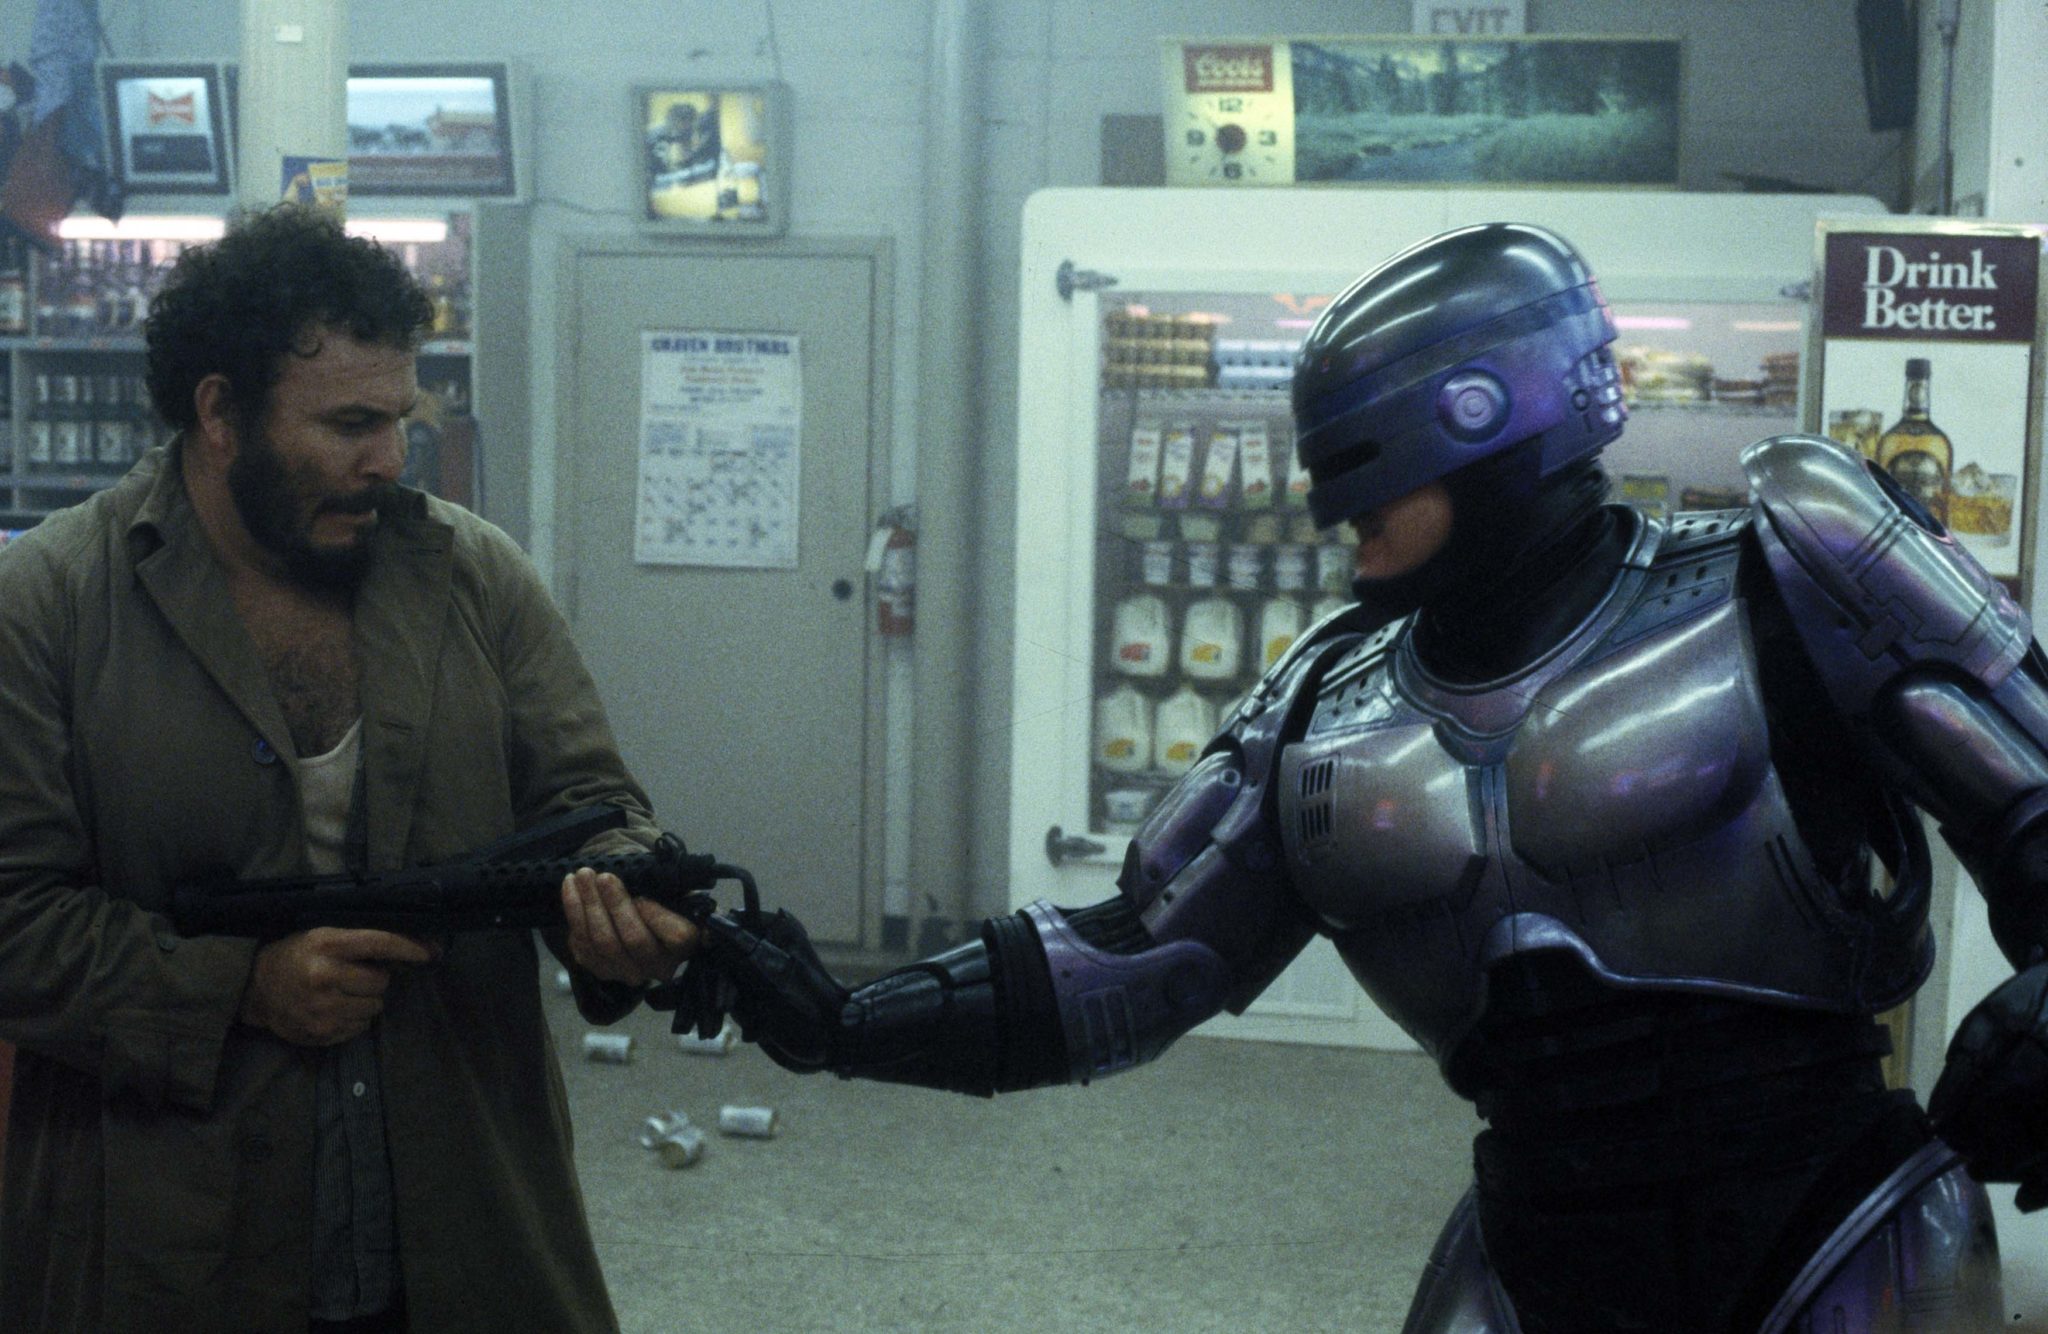 We're not quite at RoboCop yet — it can only produce a small charge. (Photo Credit: 20th Century Fox / MoviestillsDB)